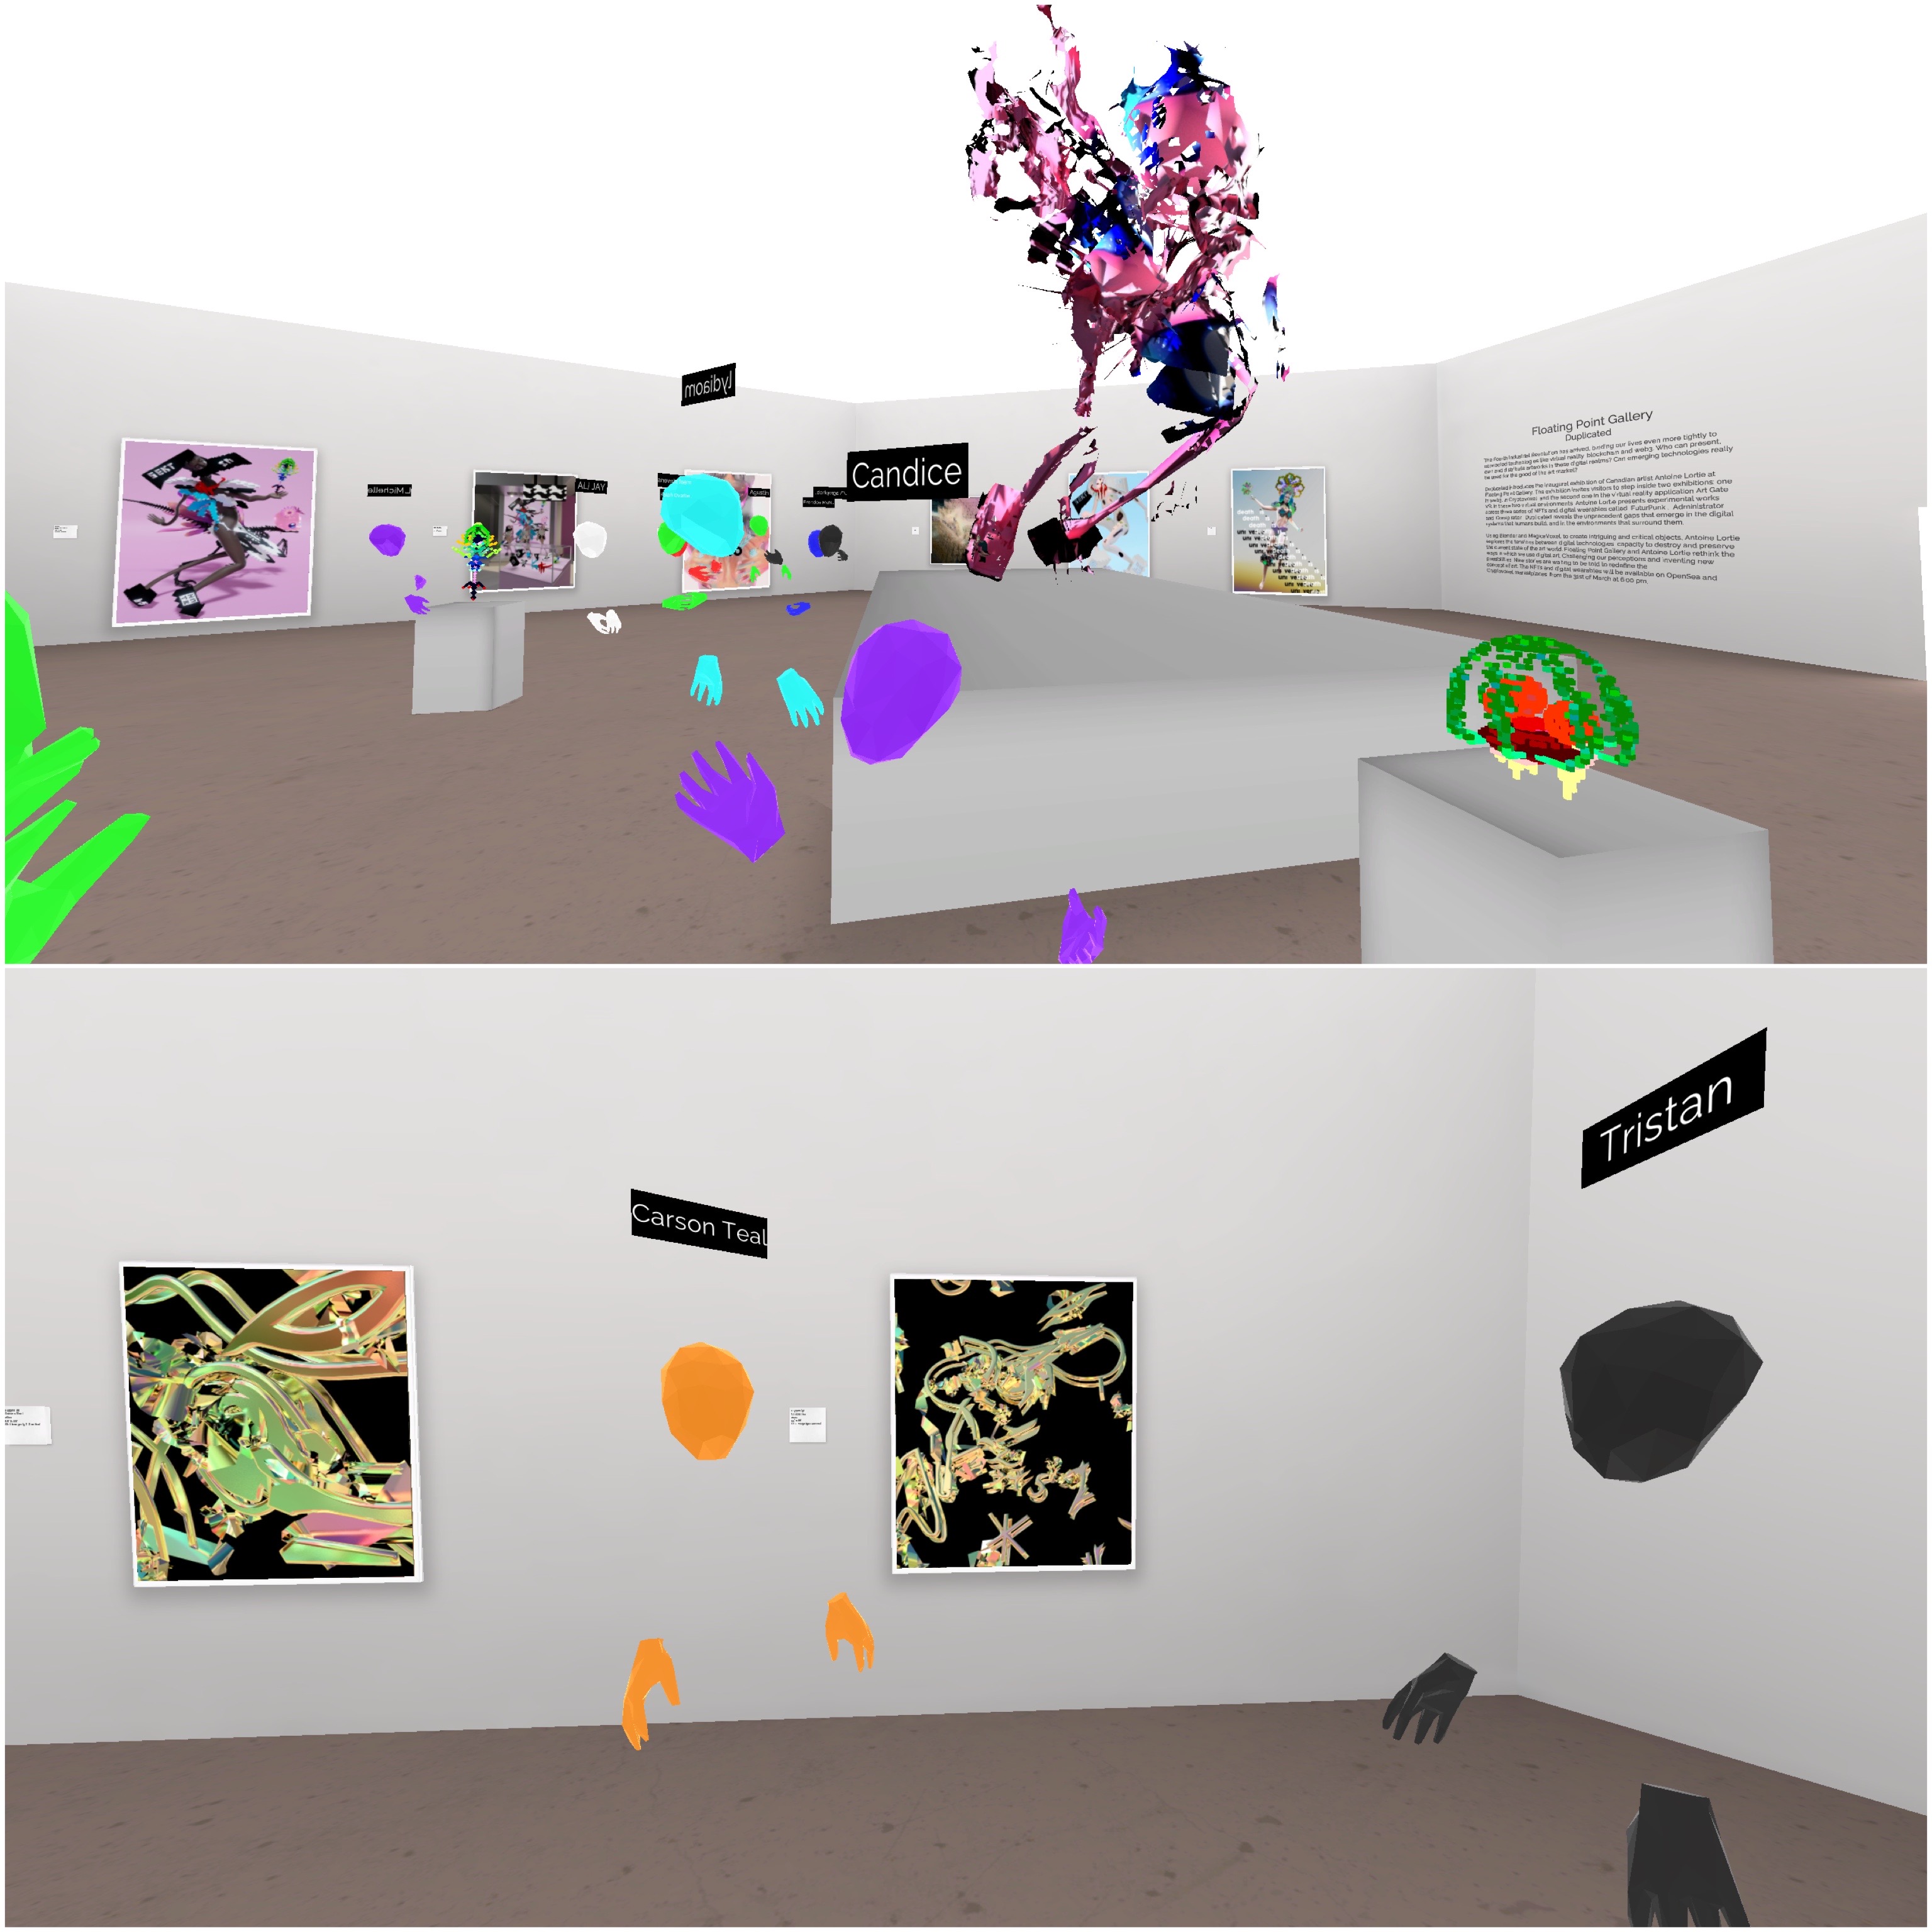 Floating Point Gallery and Sky Fine Foods co-present a multi-exhibition tour featuring new exhibitions of digital art